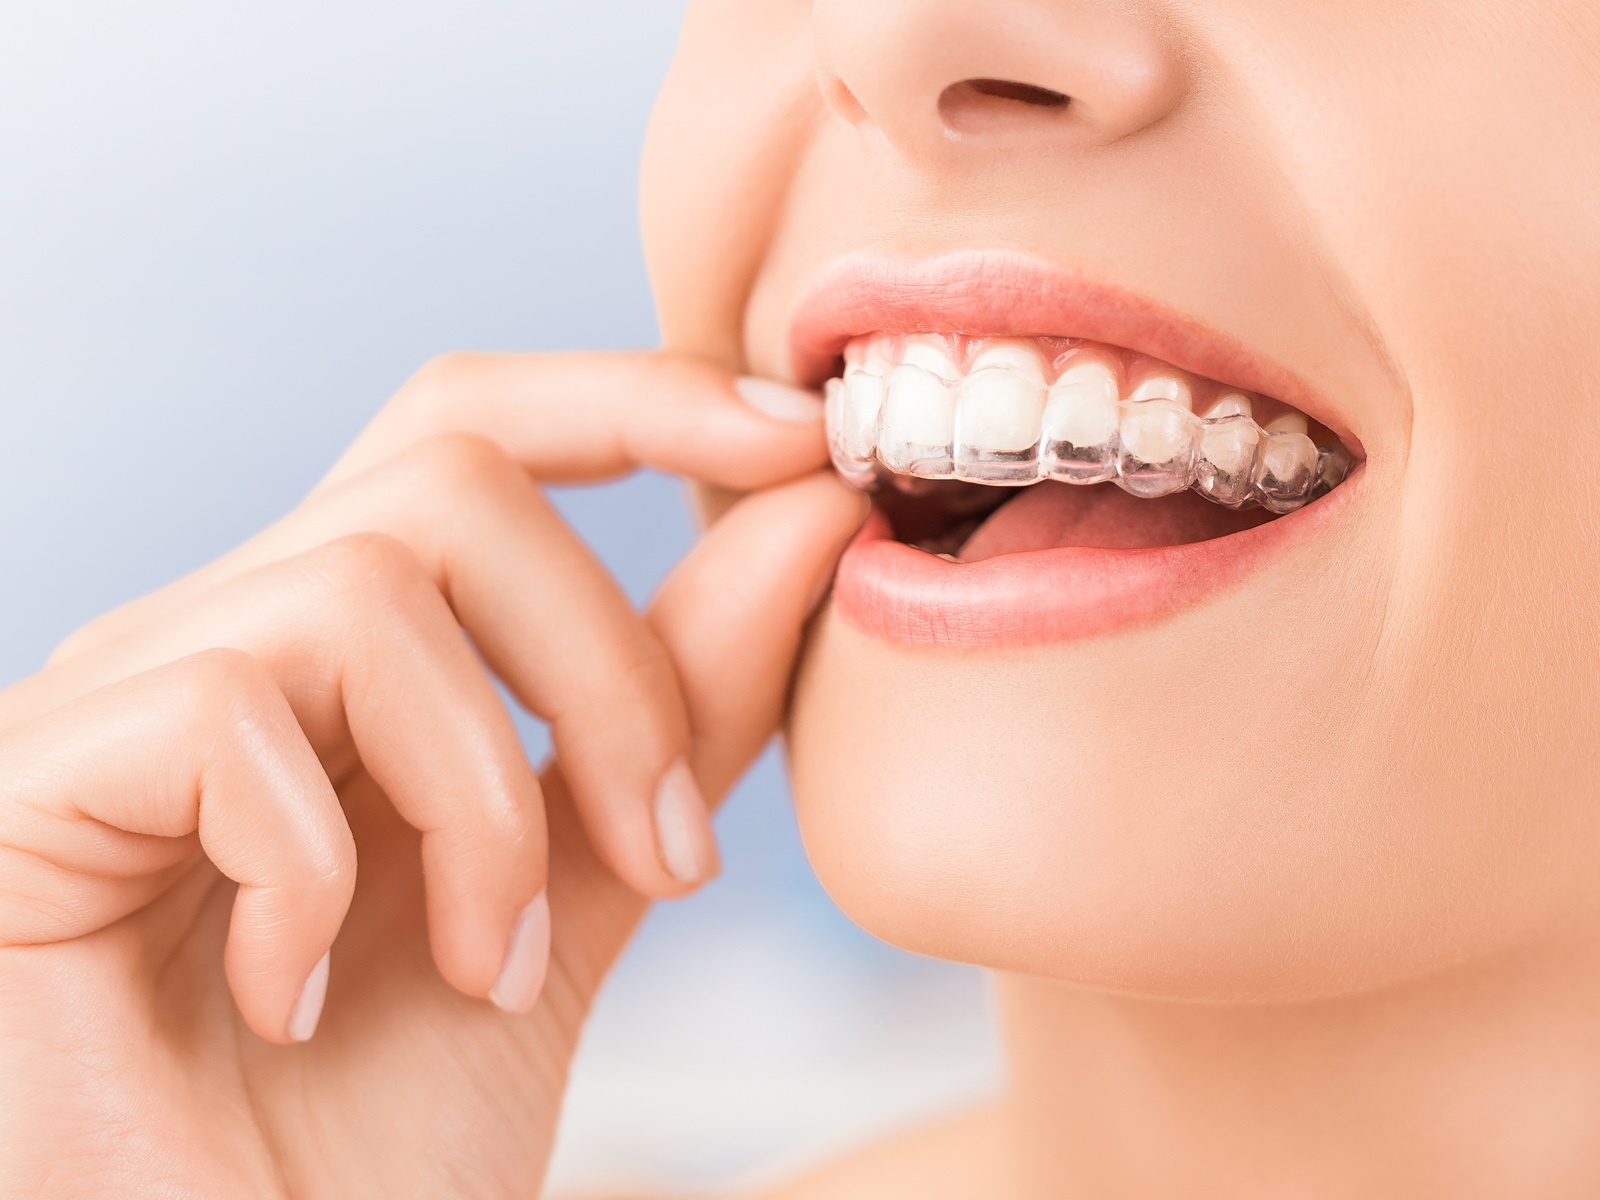 How long does an Invisalign treatment take?